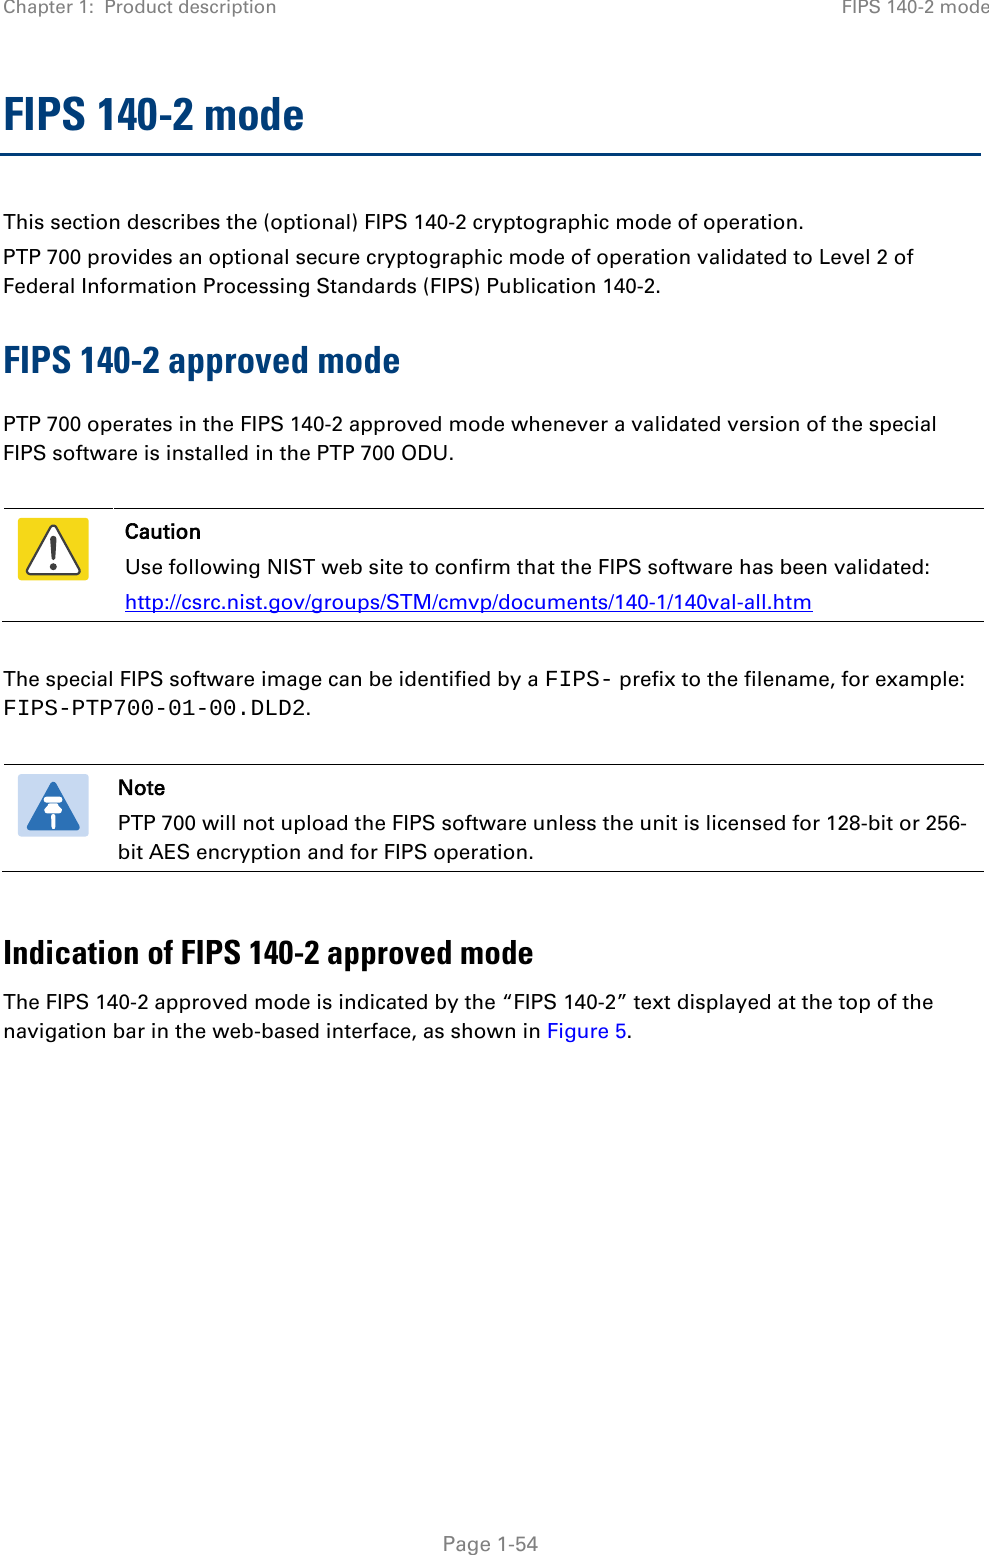 Chapter 1:  Product description FIPS 140-2 mode  FIPS 140-2 mode This section describes the (optional) FIPS 140-2 cryptographic mode of operation. PTP 700 provides an optional secure cryptographic mode of operation validated to Level 2 of Federal Information Processing Standards (FIPS) Publication 140-2. FIPS 140-2 approved mode PTP 700 operates in the FIPS 140-2 approved mode whenever a validated version of the special FIPS software is installed in the PTP 700 ODU.   Caution Use following NIST web site to confirm that the FIPS software has been validated: http://csrc.nist.gov/groups/STM/cmvp/documents/140-1/140val-all.htm  The special FIPS software image can be identified by a FIPS- prefix to the filename, for example: FIPS-PTP700-01-00.DLD2.   Note PTP 700 will not upload the FIPS software unless the unit is licensed for 128-bit or 256-bit AES encryption and for FIPS operation.  Indication of FIPS 140-2 approved mode The FIPS 140-2 approved mode is indicated by the “FIPS 140-2” text displayed at the top of the navigation bar in the web-based interface, as shown in Figure 5.  Page 1-54 